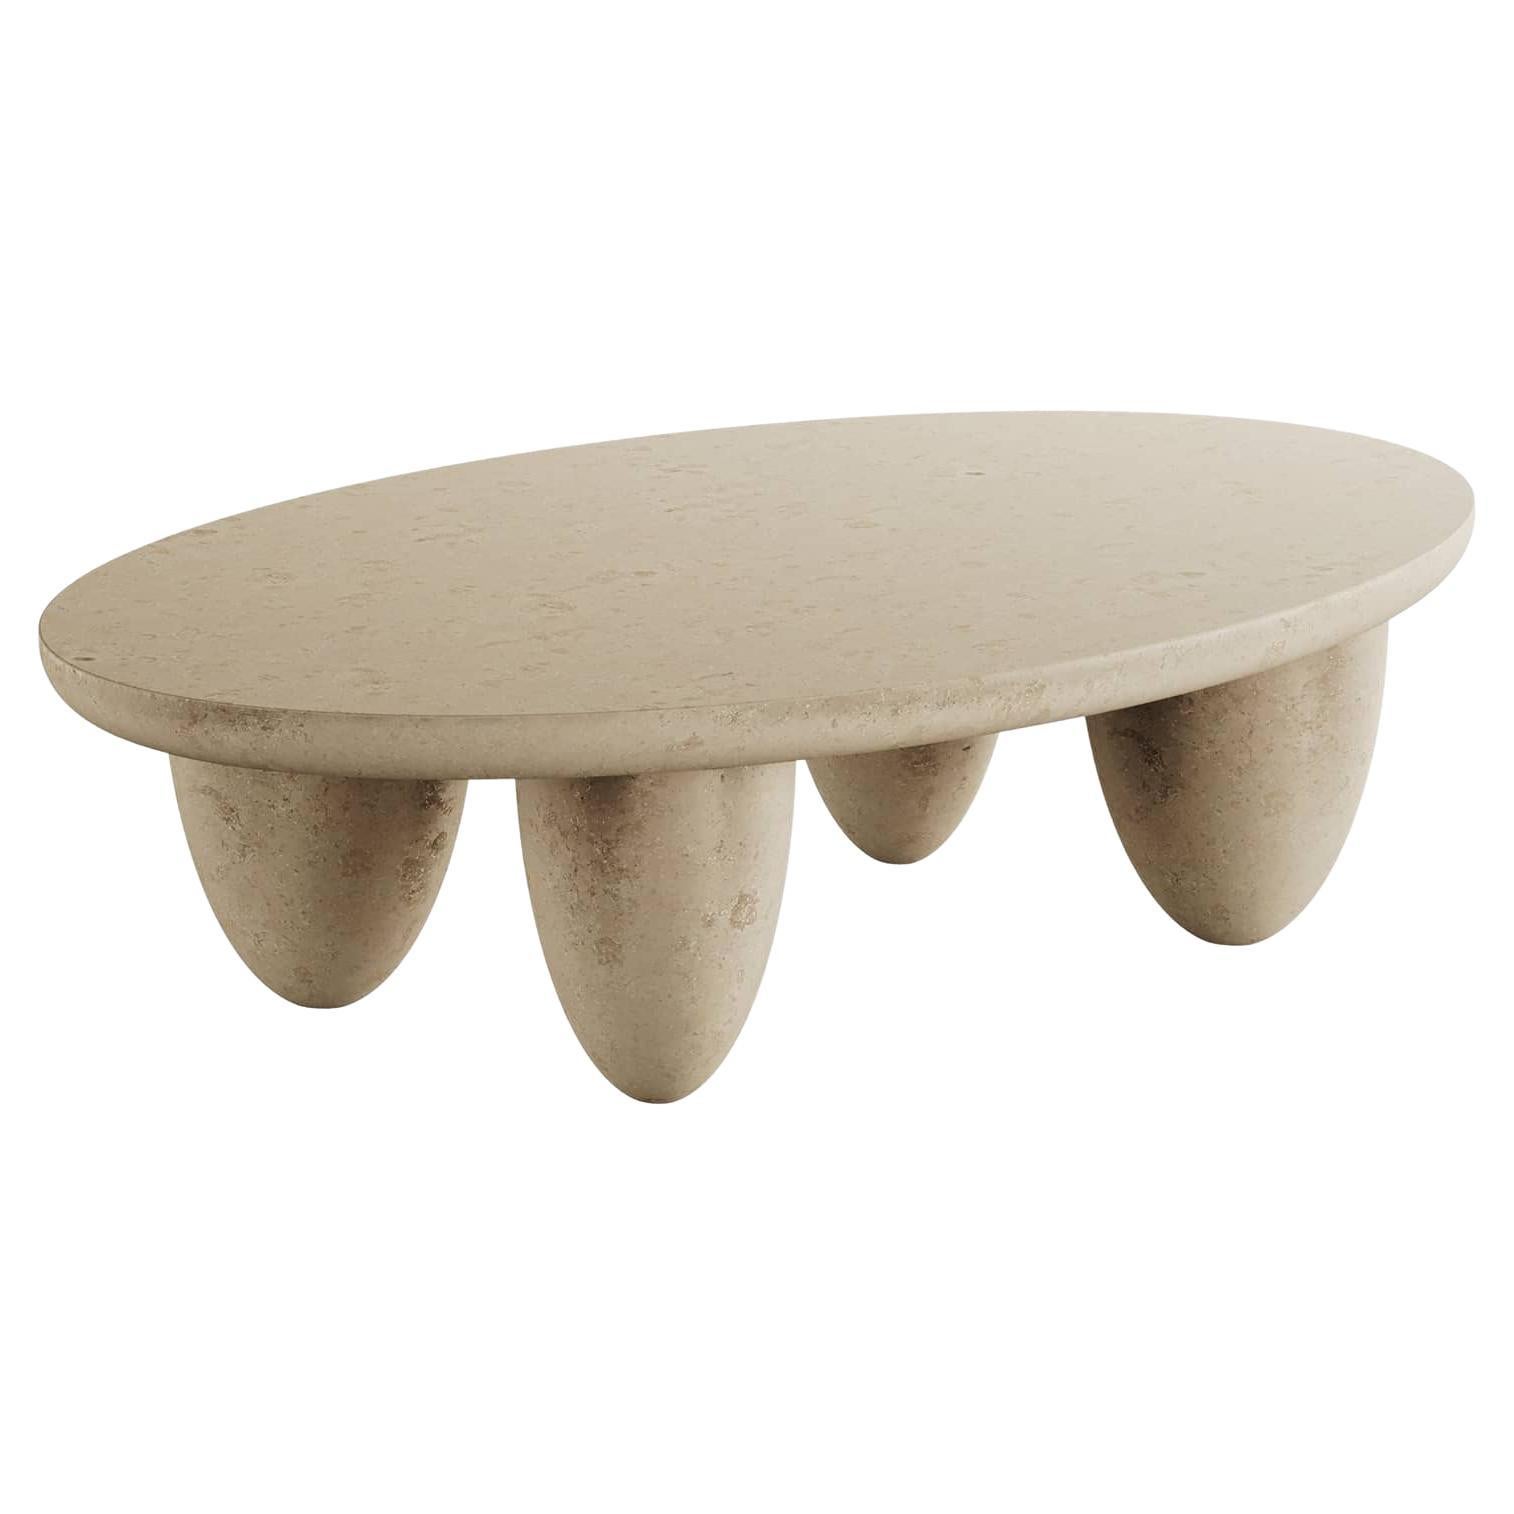 Contemporary Minimal Outdoor & Indoor Oval Coffee Table Natural Beige Limestone